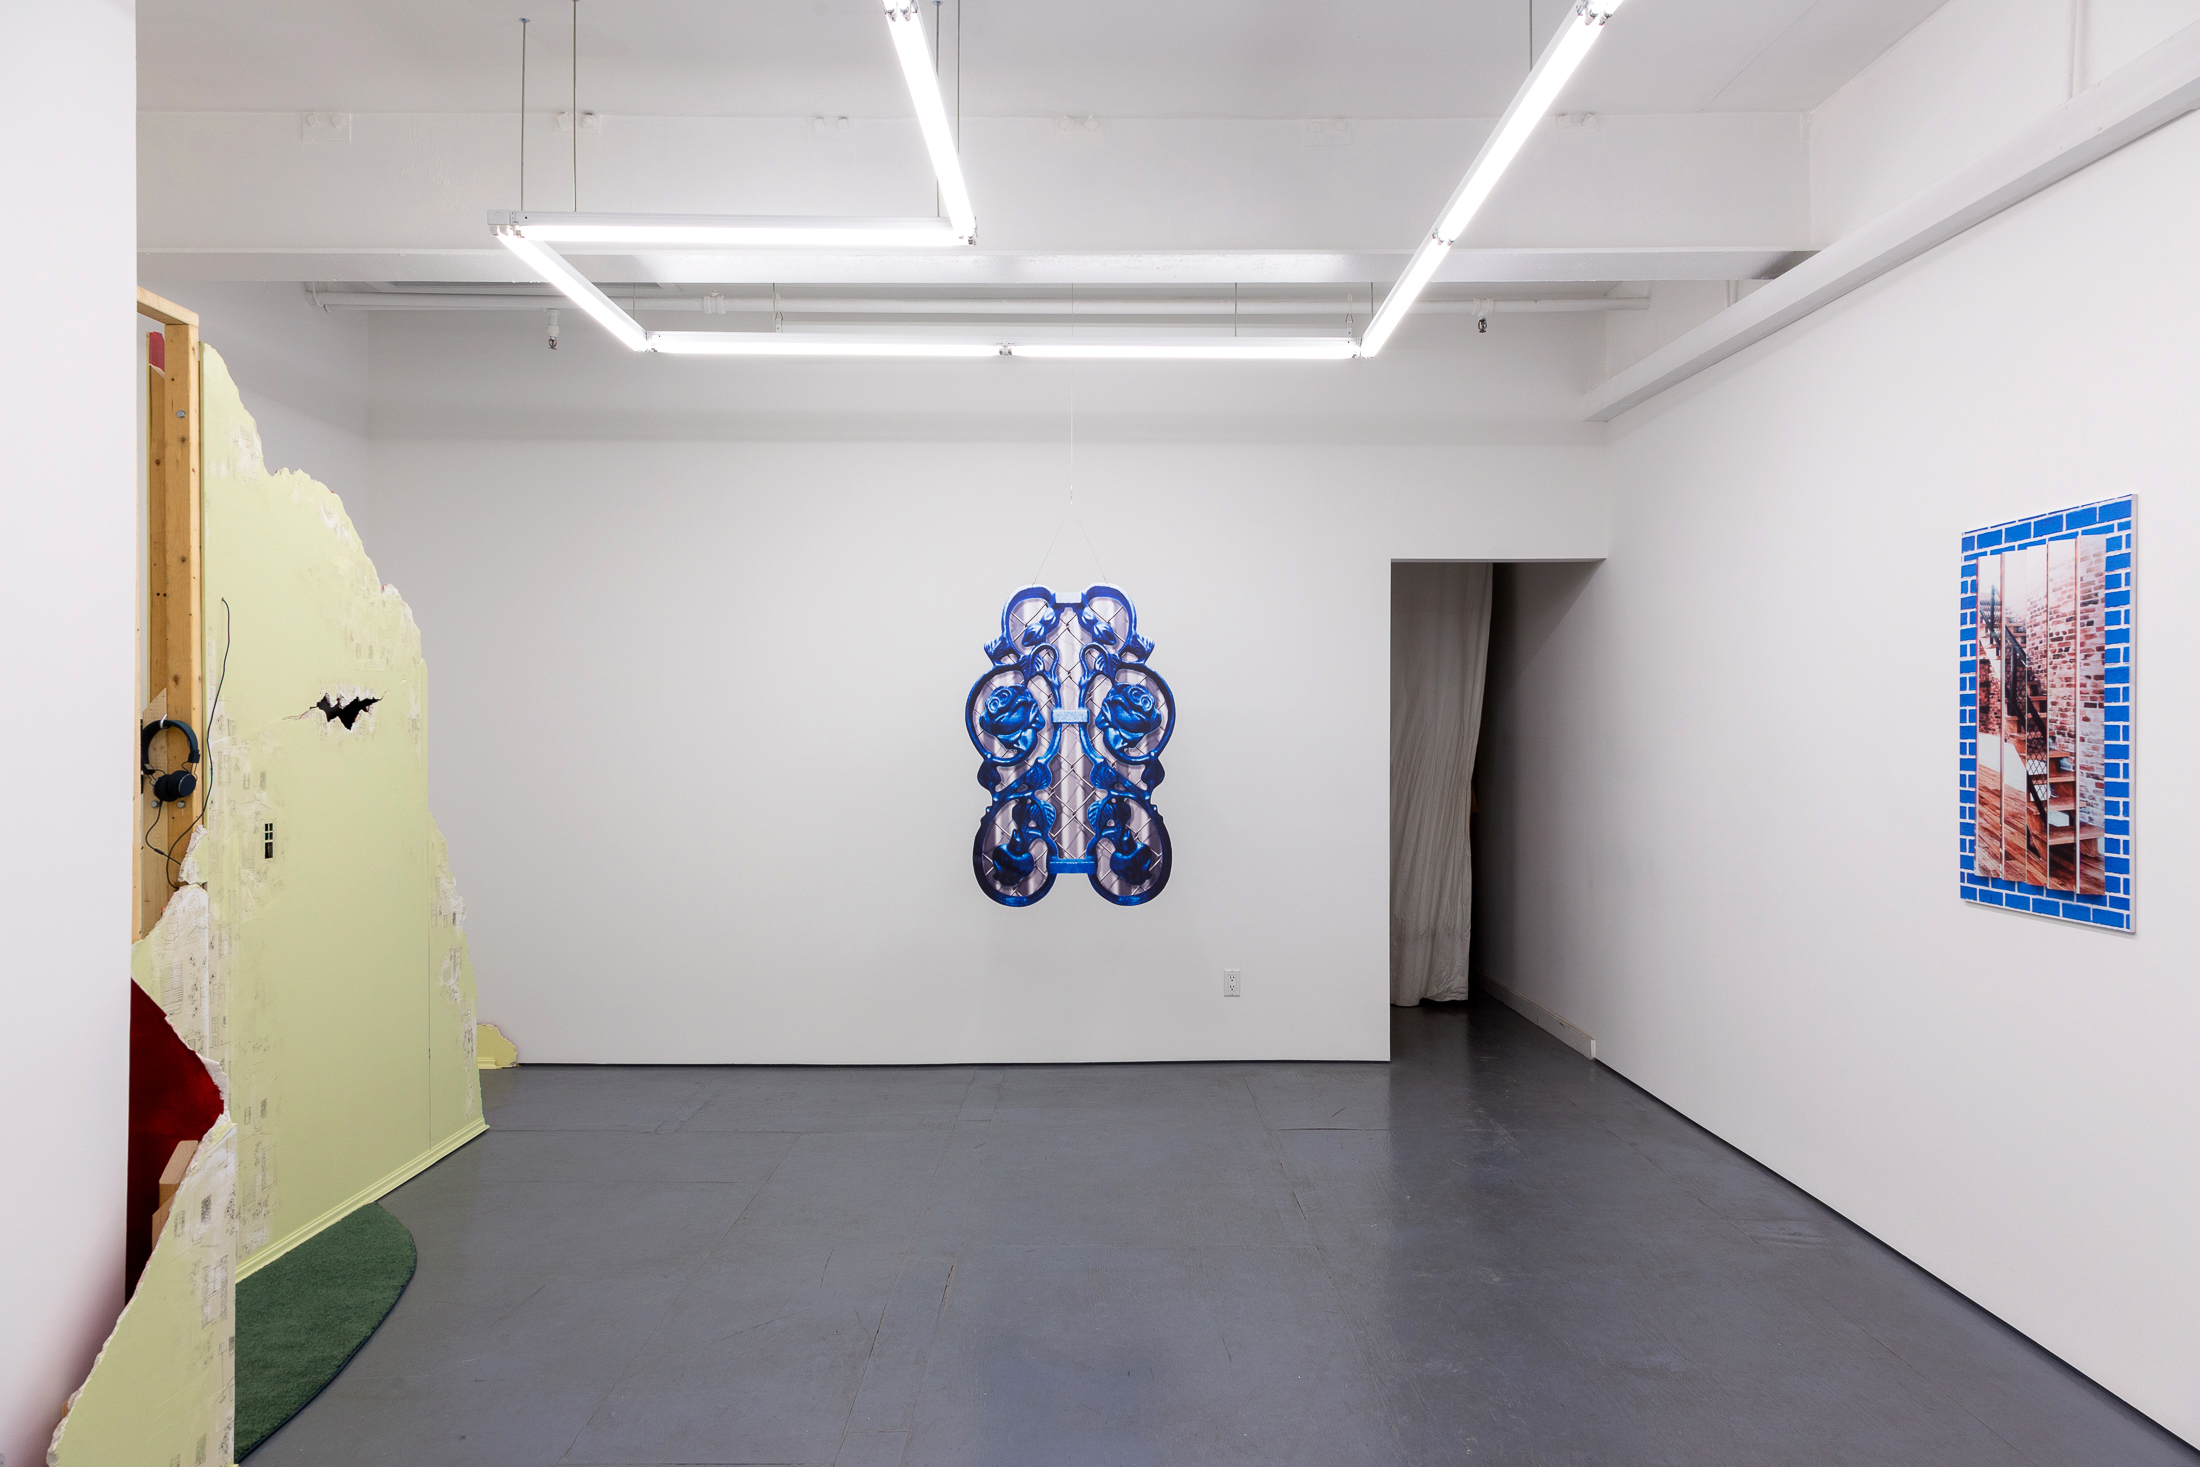  Installation view of Inside Out at Transmitter 